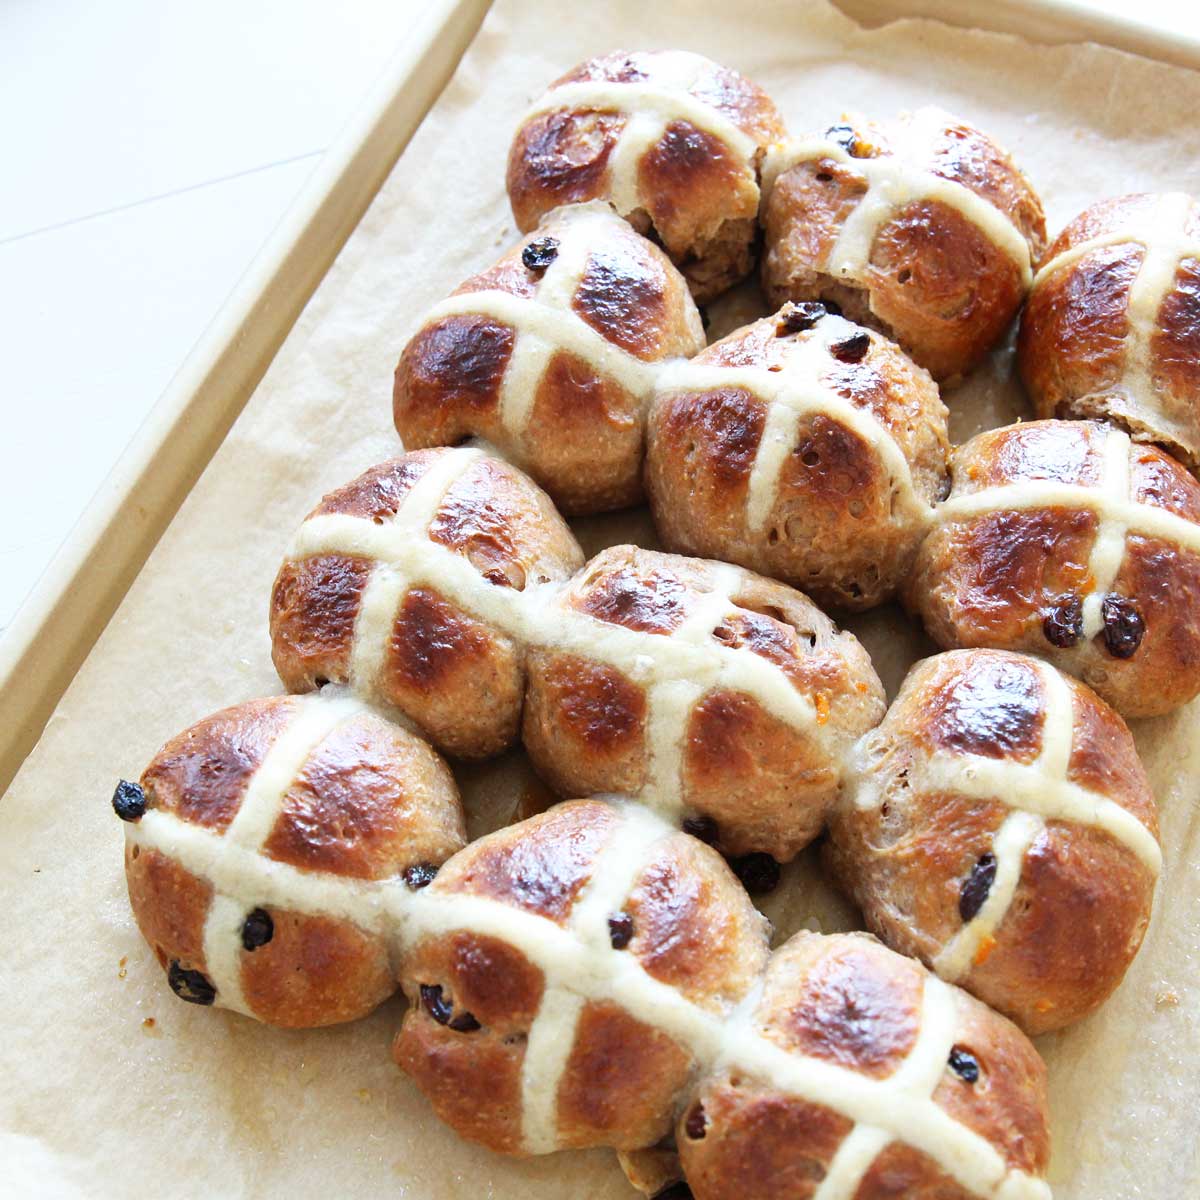 Soft & Fluffy Ricotta Cheese Hot Cross Buns - Perfect for Easter! - Roasted Corn Naan